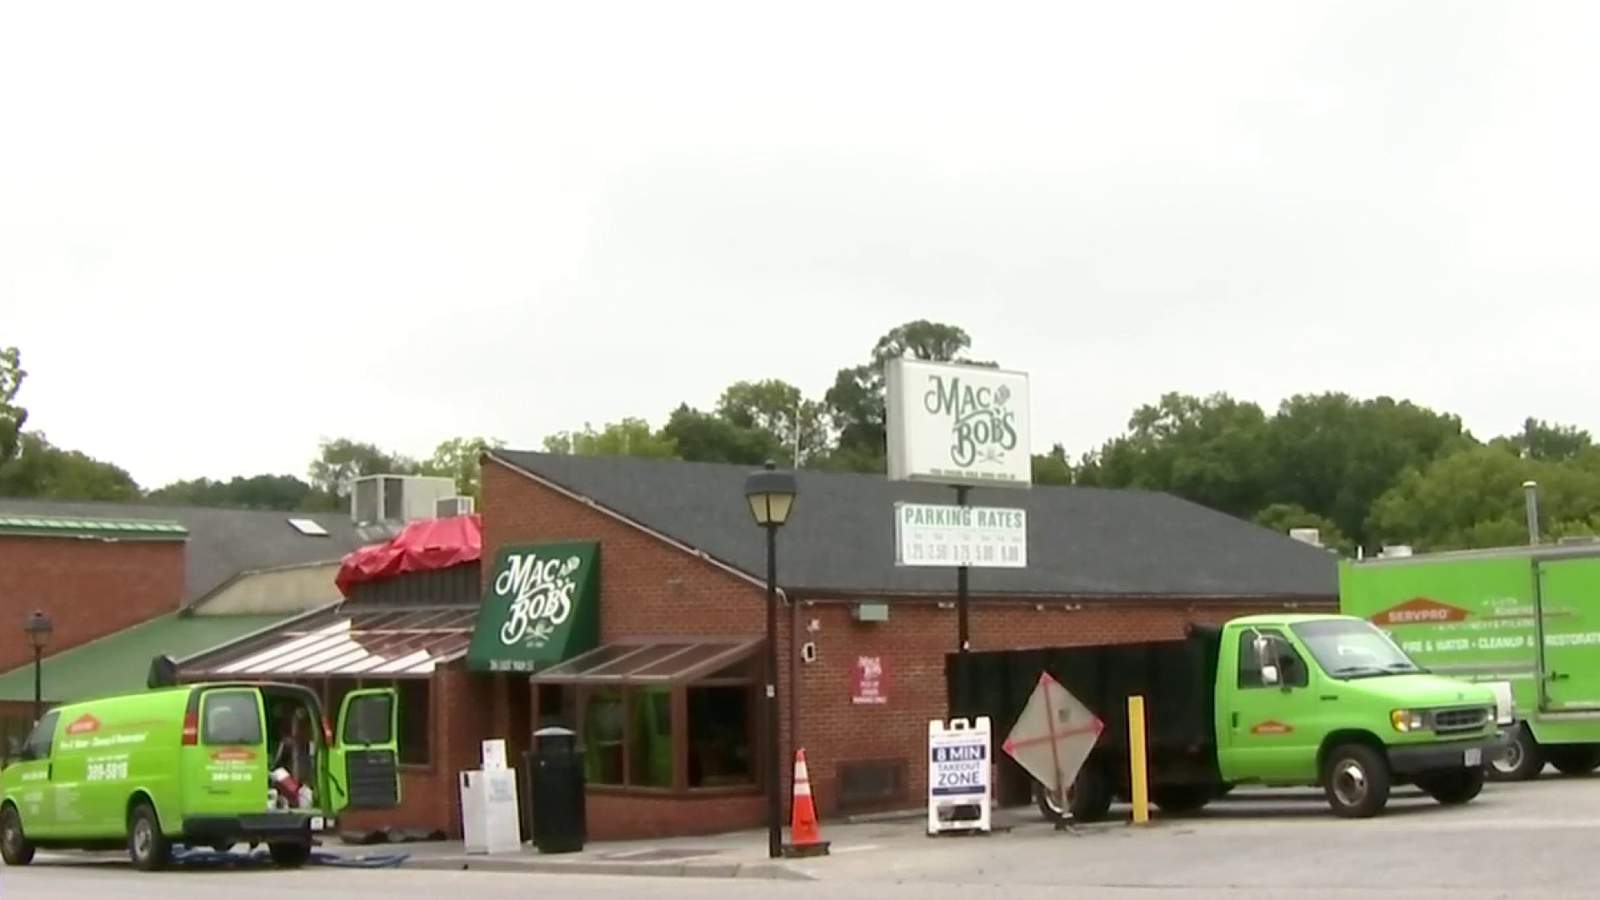 ‘We’re supporting you’: After COVID-19 cases, then fire, Mac and Bob’s co-owner says customers keep them going